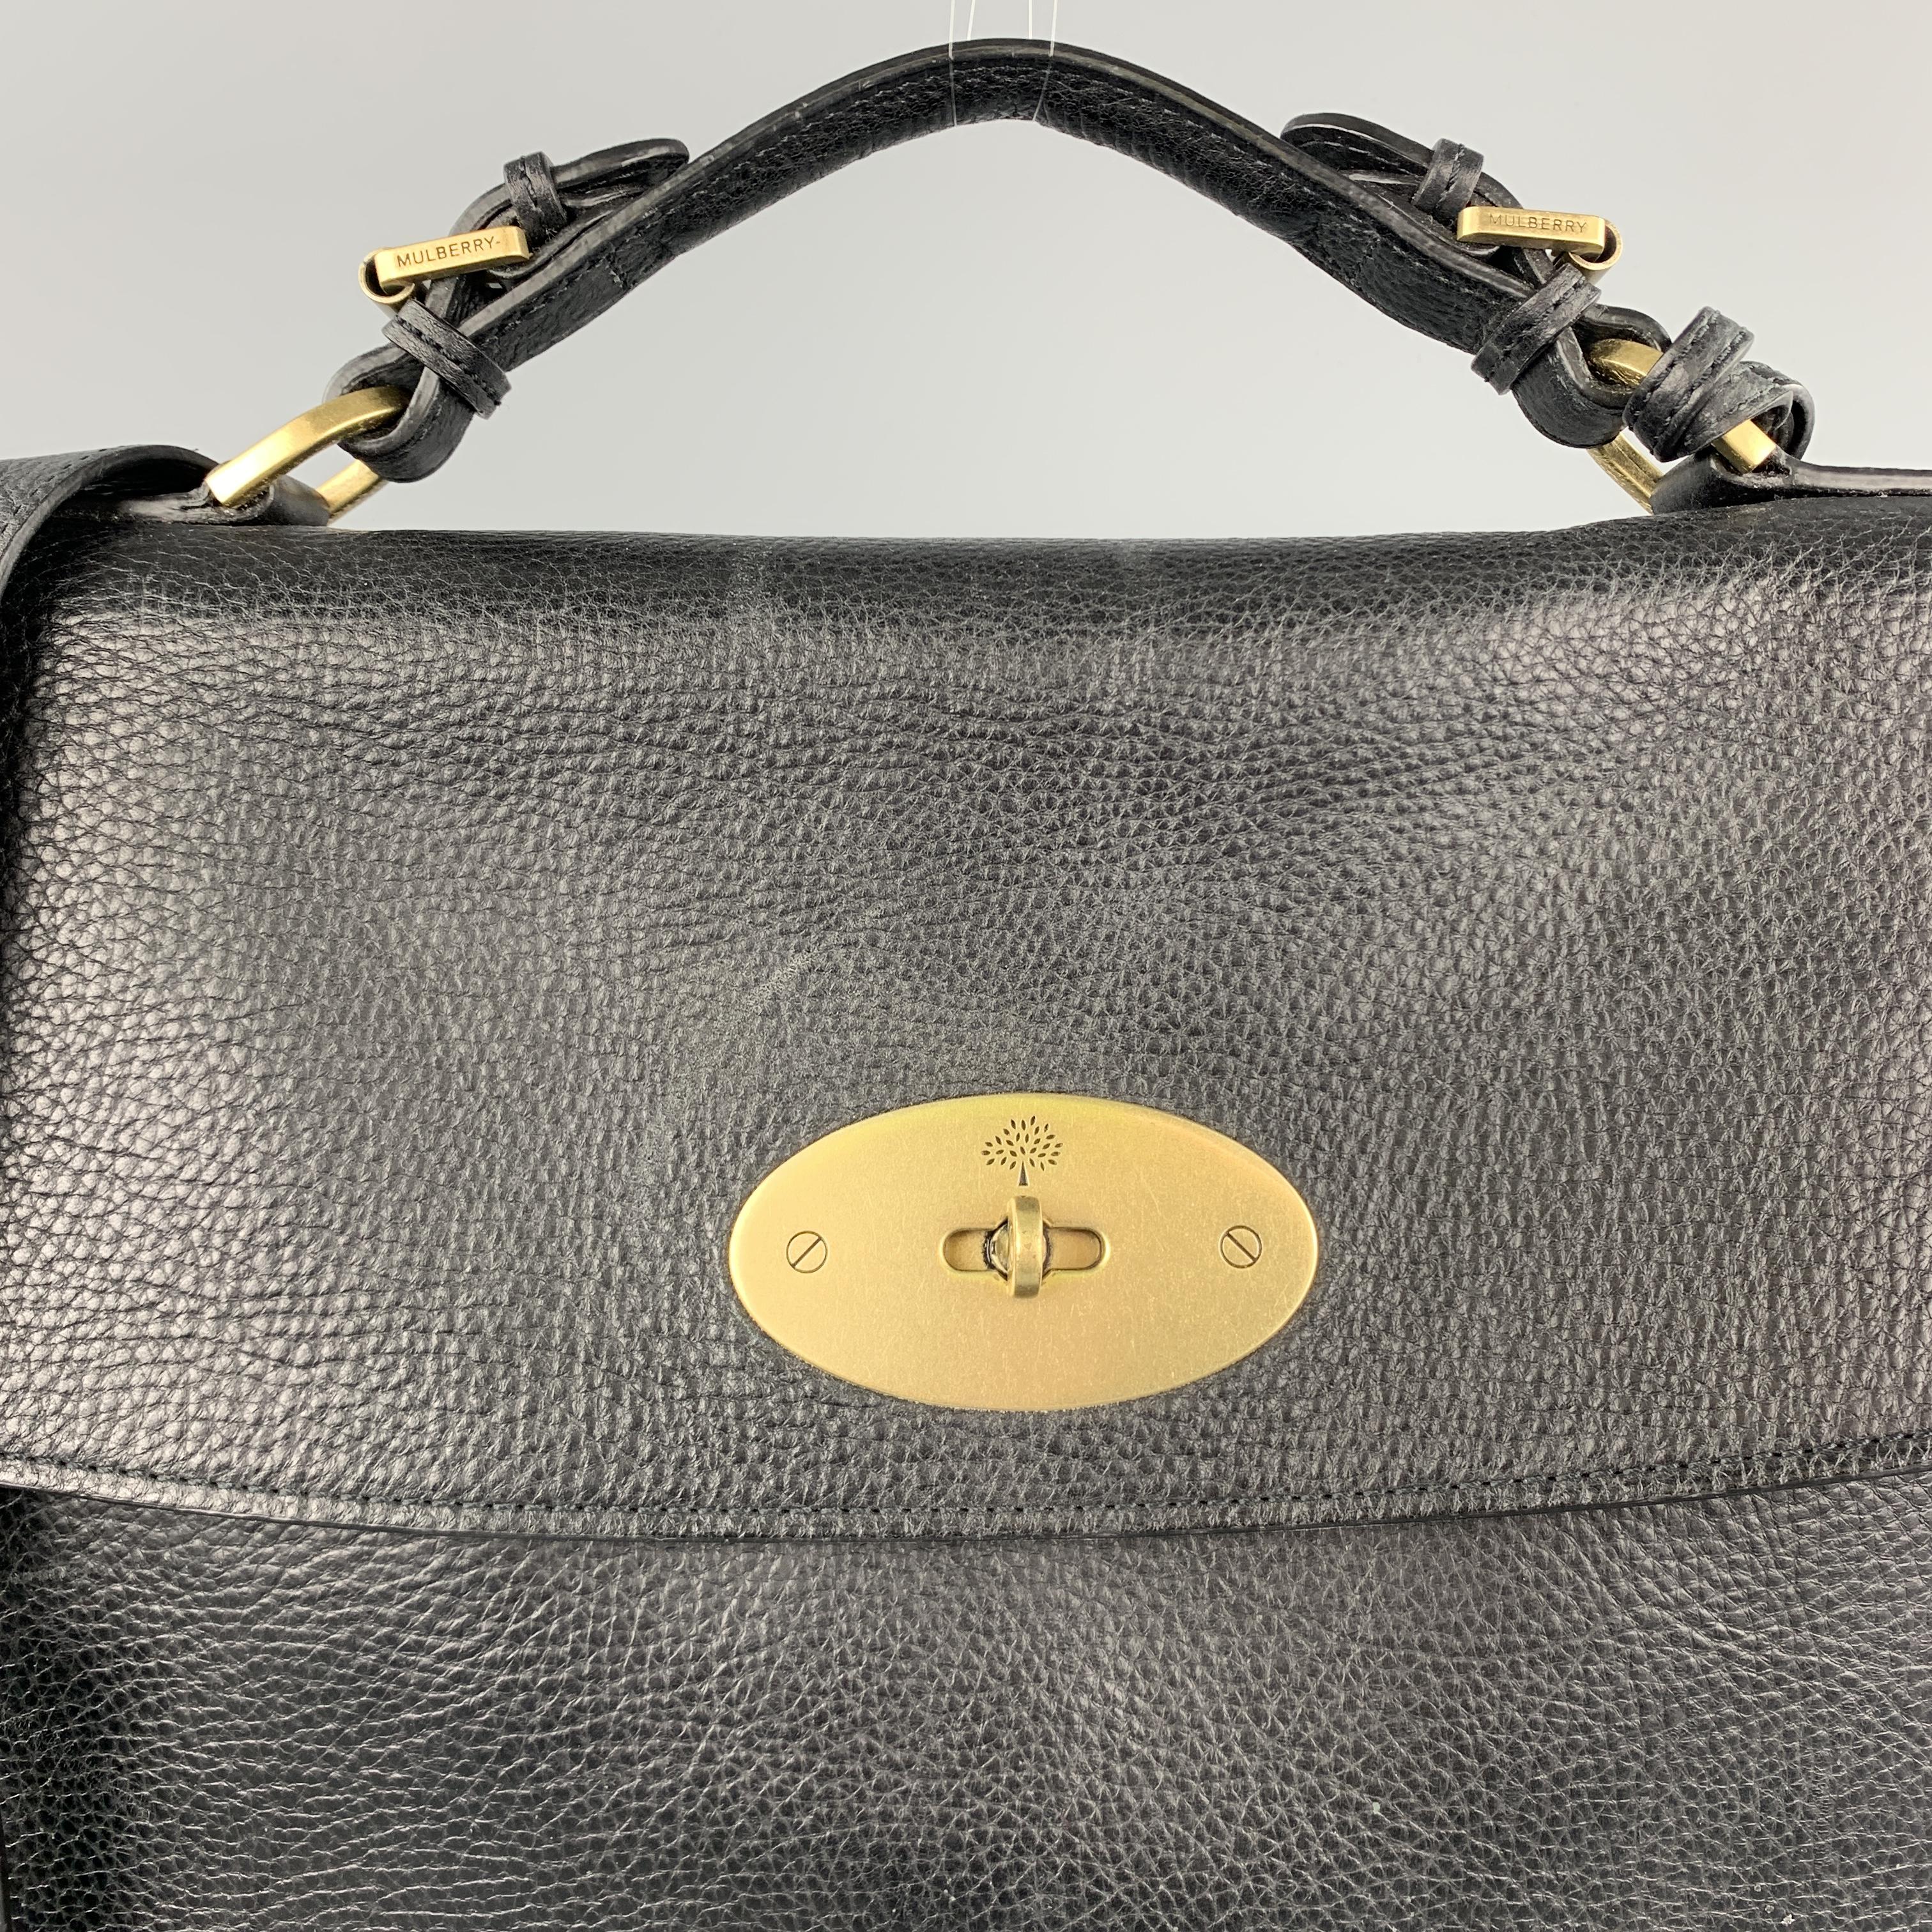 MULBERRY bag comes in a black pebble grain leather featuring a briefcase style, top handle, shoulder strap, and a locket closure. As Is.

Good Pre-Owned Condition.

Measurements:

Length: 14.5 in.
Width: 2.5 in. 
Height: 11 in. 
Drop: 20 in. 